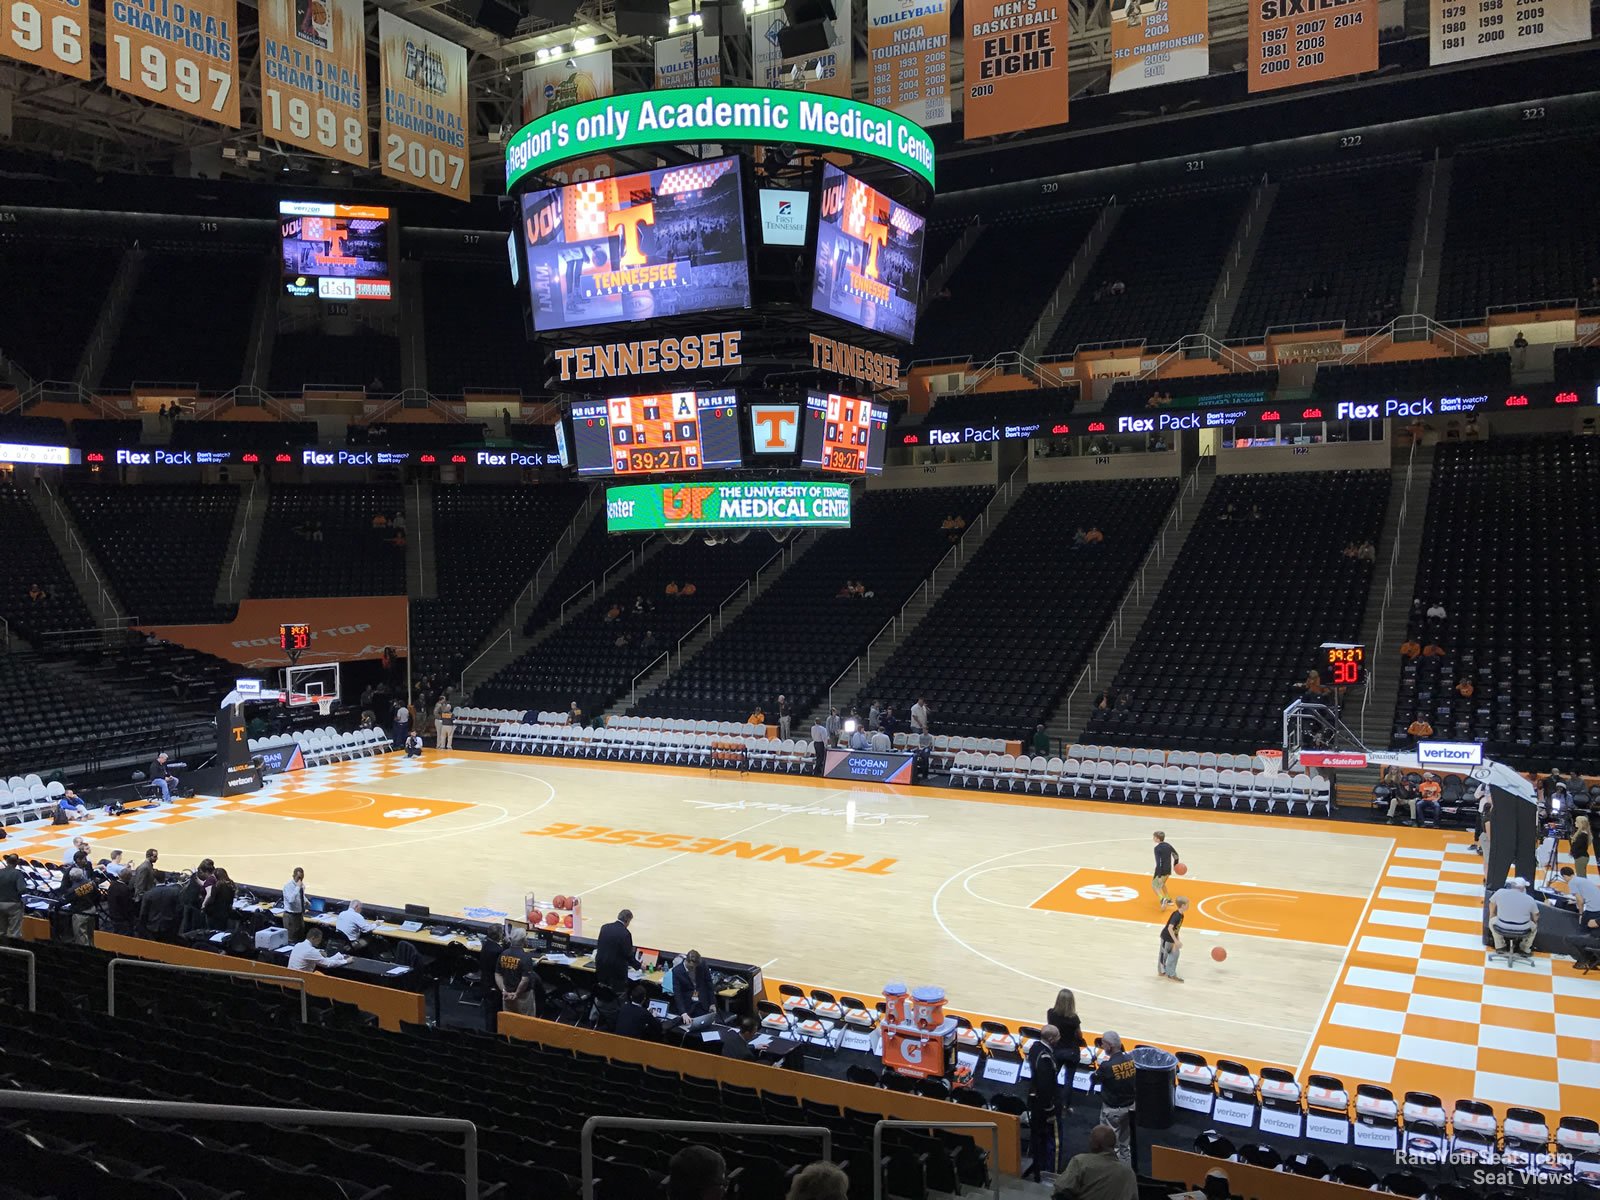 section 103, row 17 seat view  - thompson-boling arena